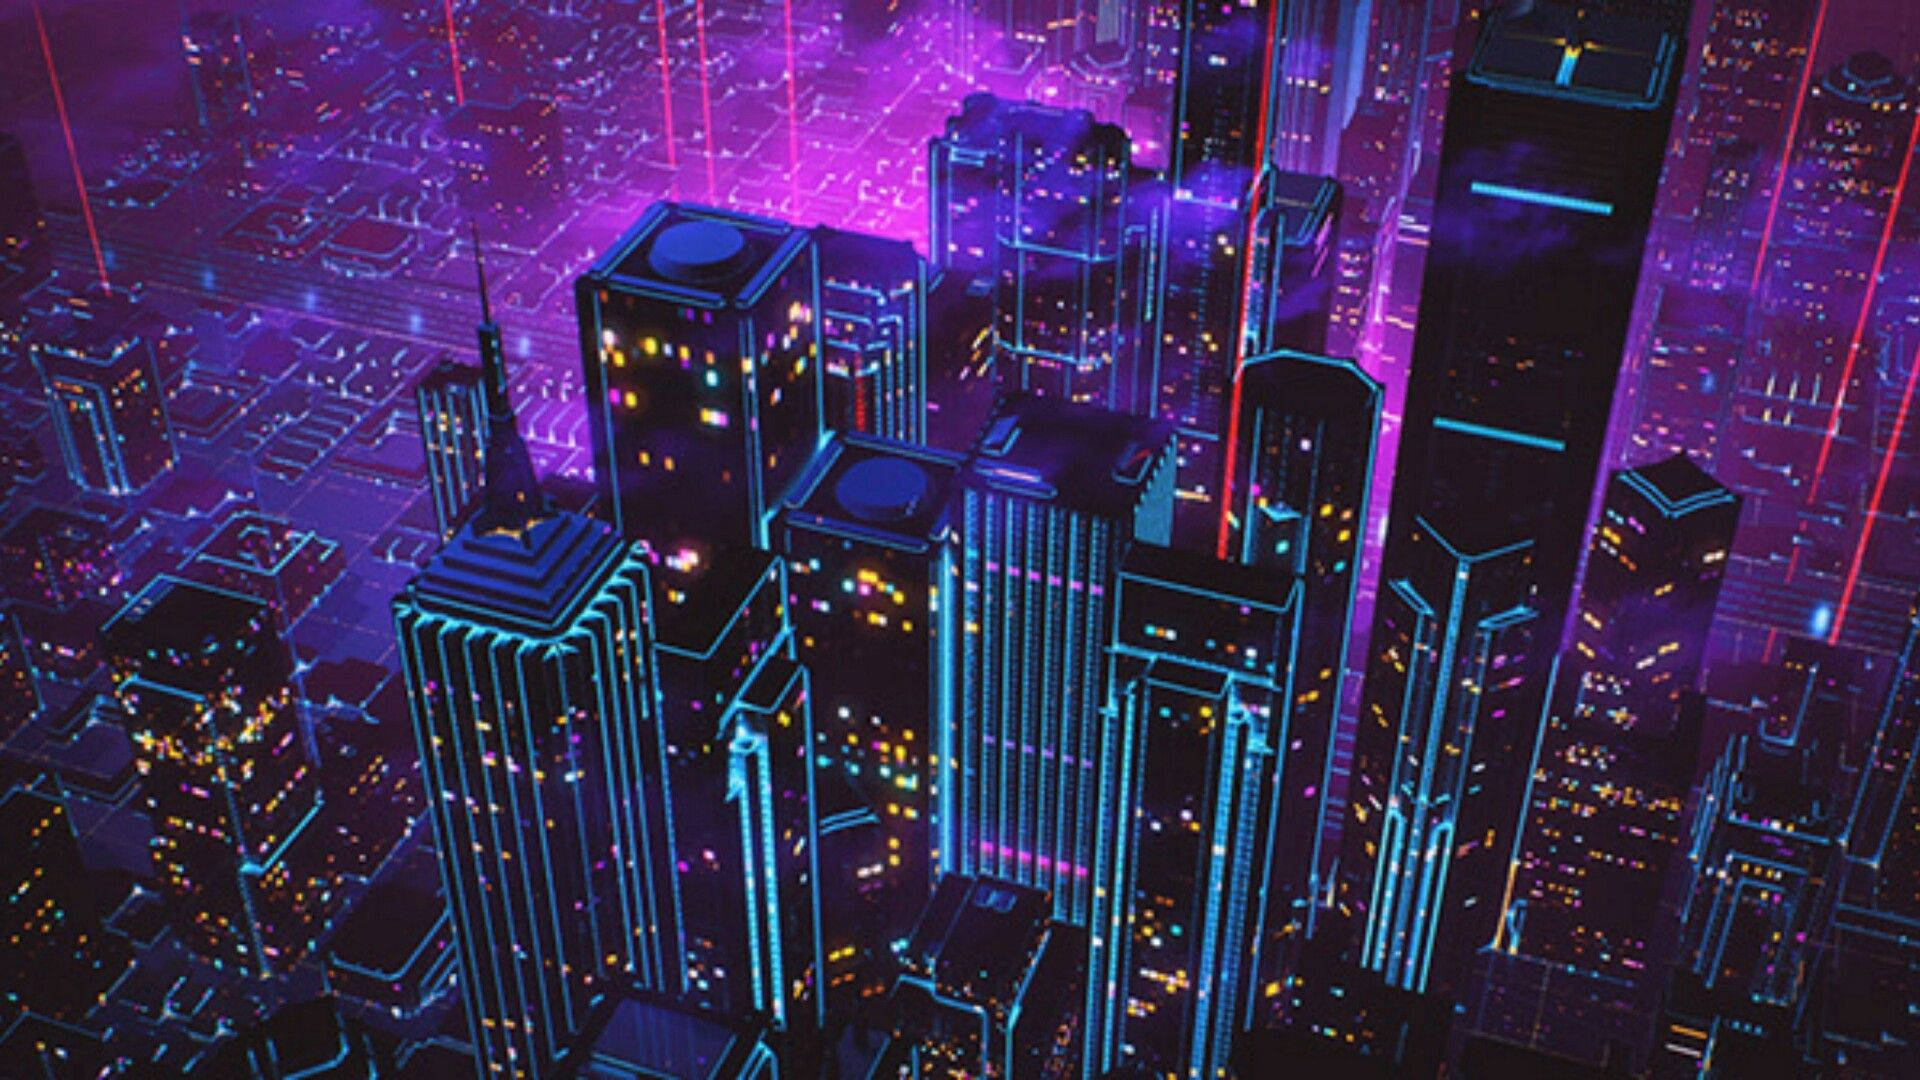 Free Neon City Wallpaper Downloads, [200+] Neon City Wallpapers for FREE |  